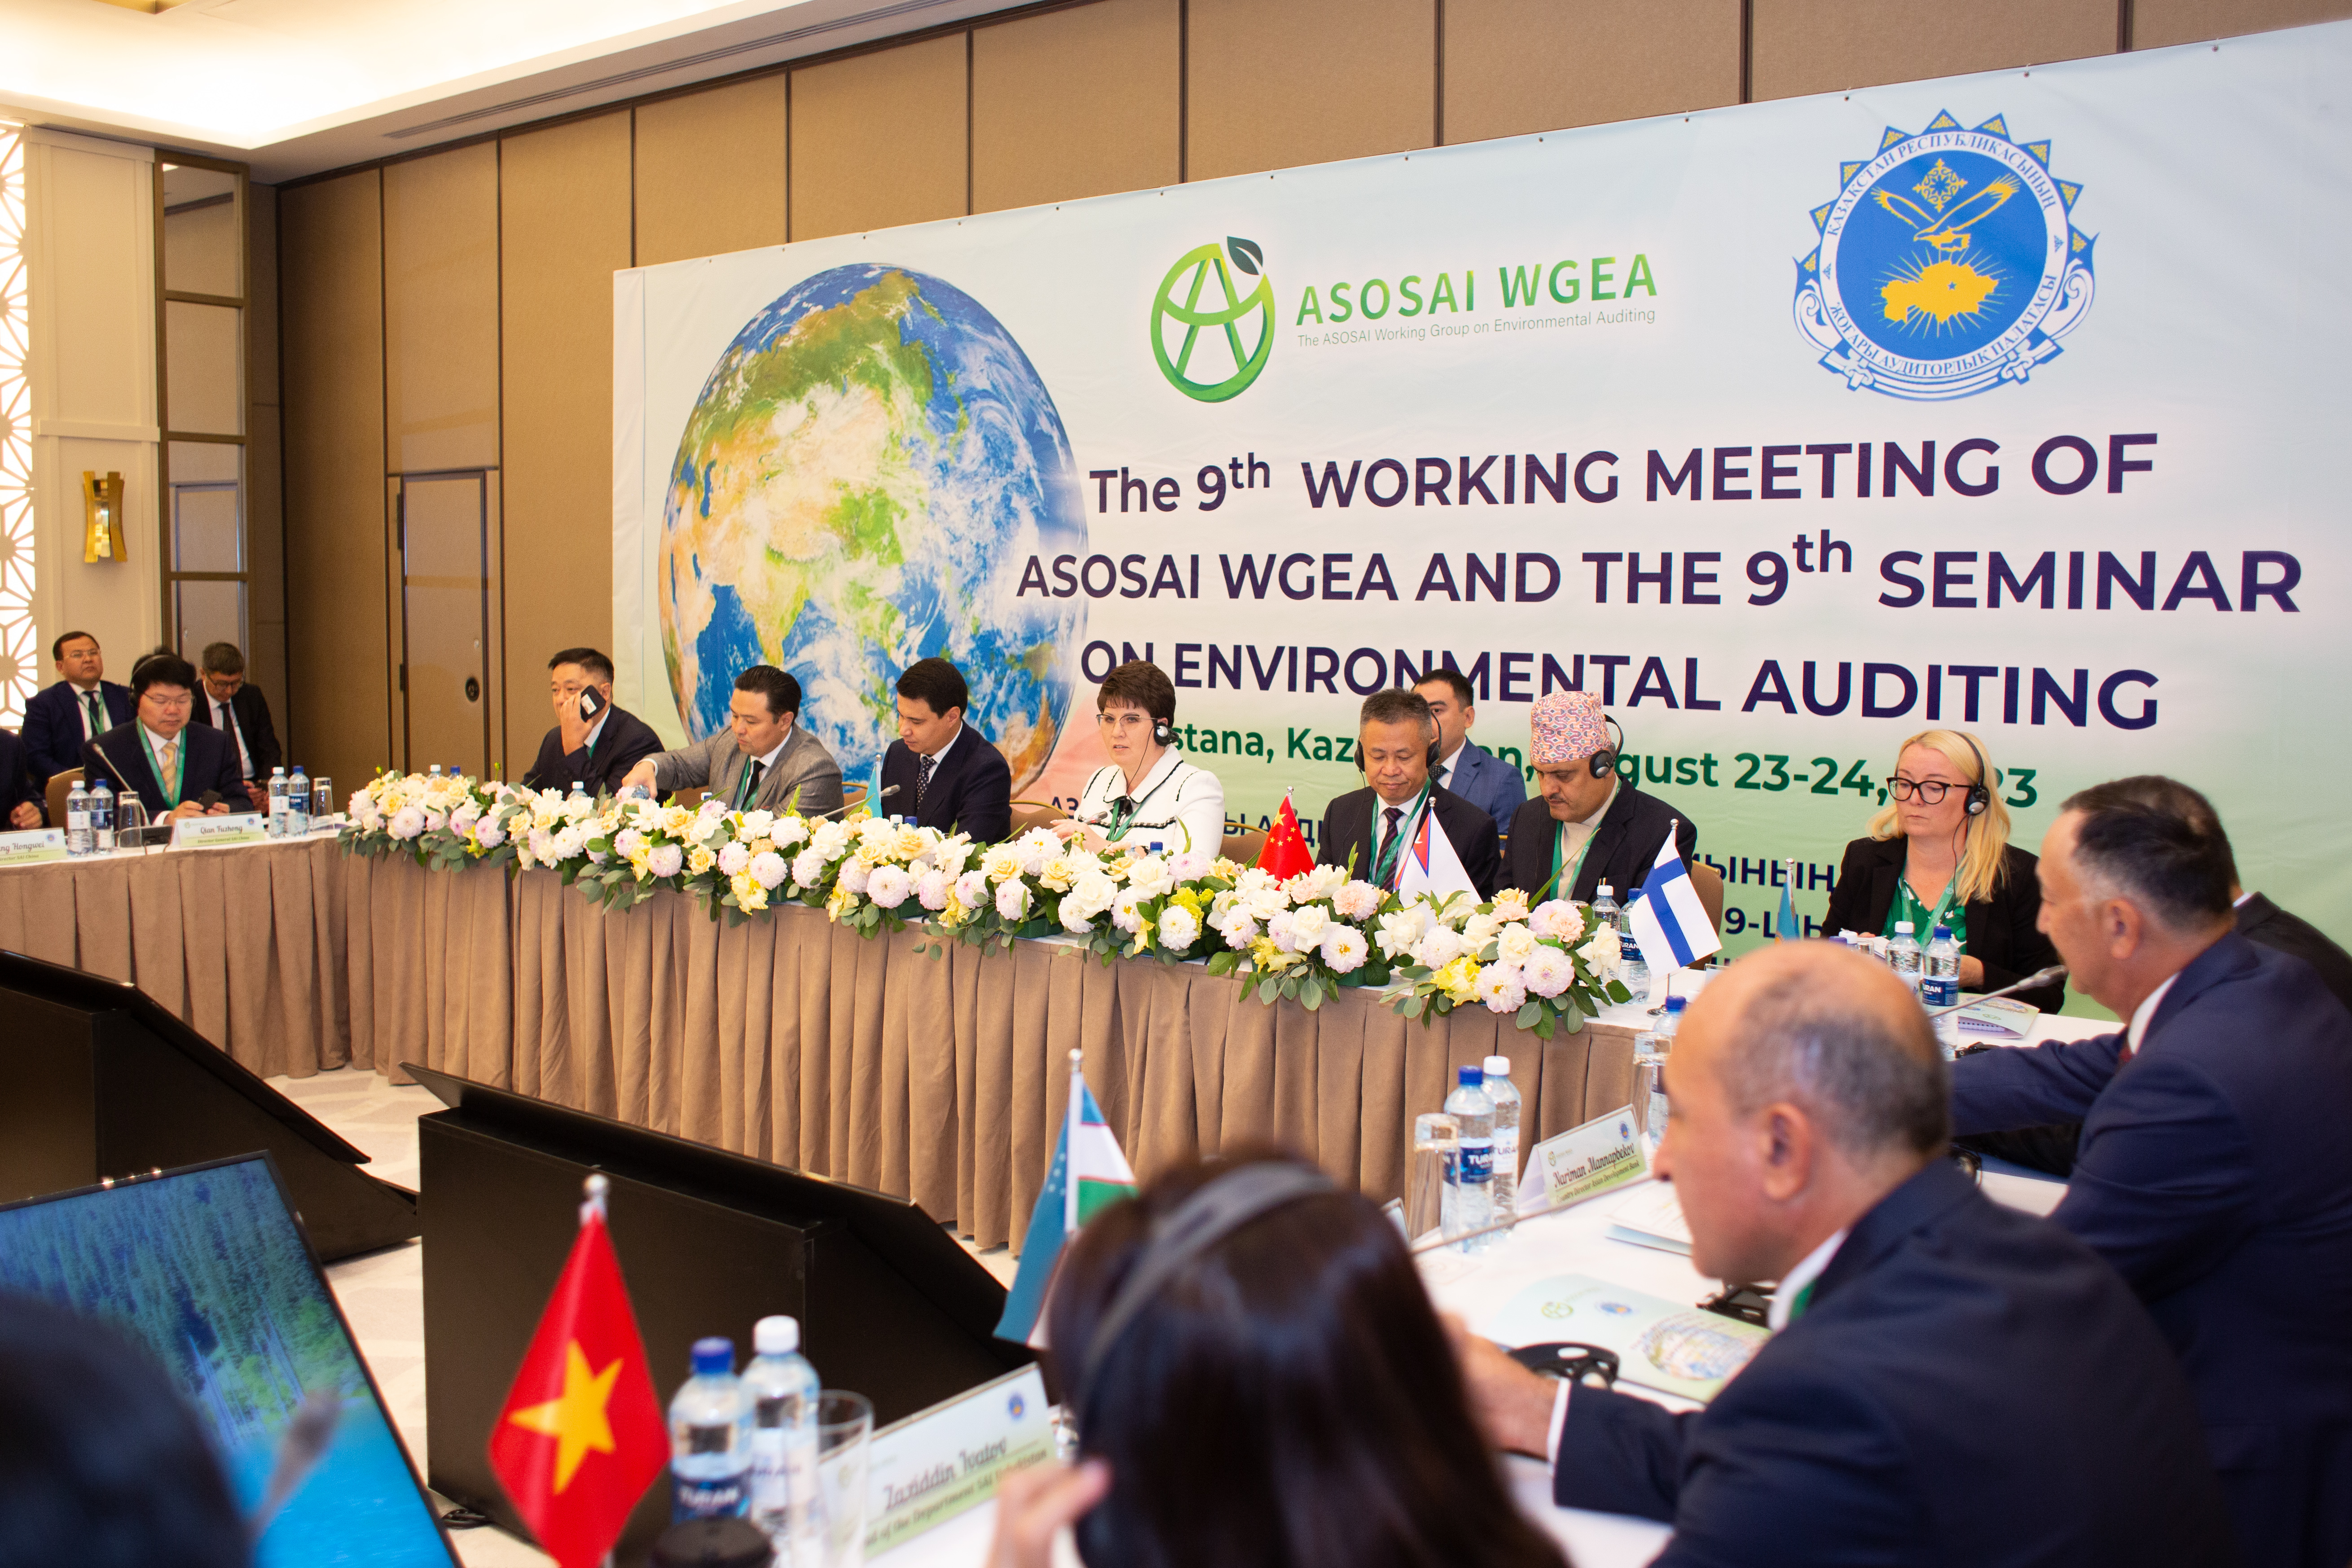 The 9th Meeting of the Working Group on Environmental Audit of ASOSAI has ended